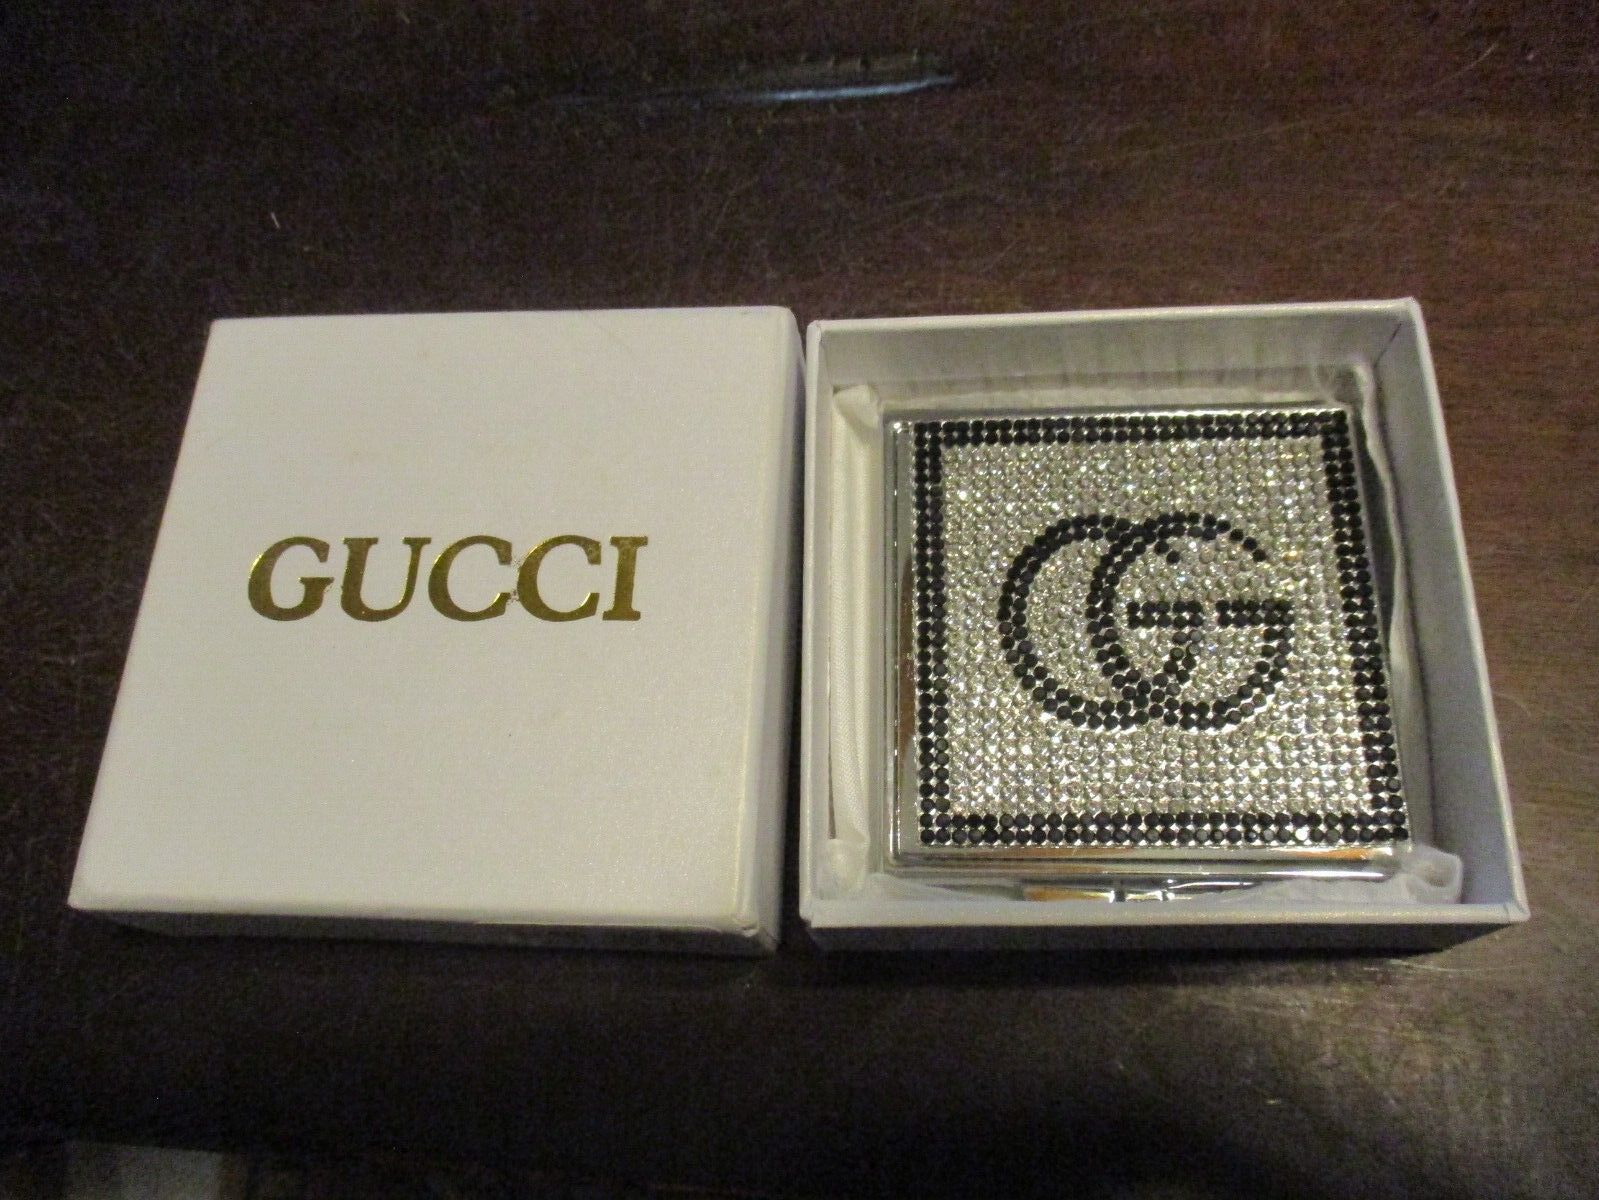 GUCCI LADIES POCKET MAKE UP MIRROR IN BOX WITH CLOTH BAG 2 3/4 X 3